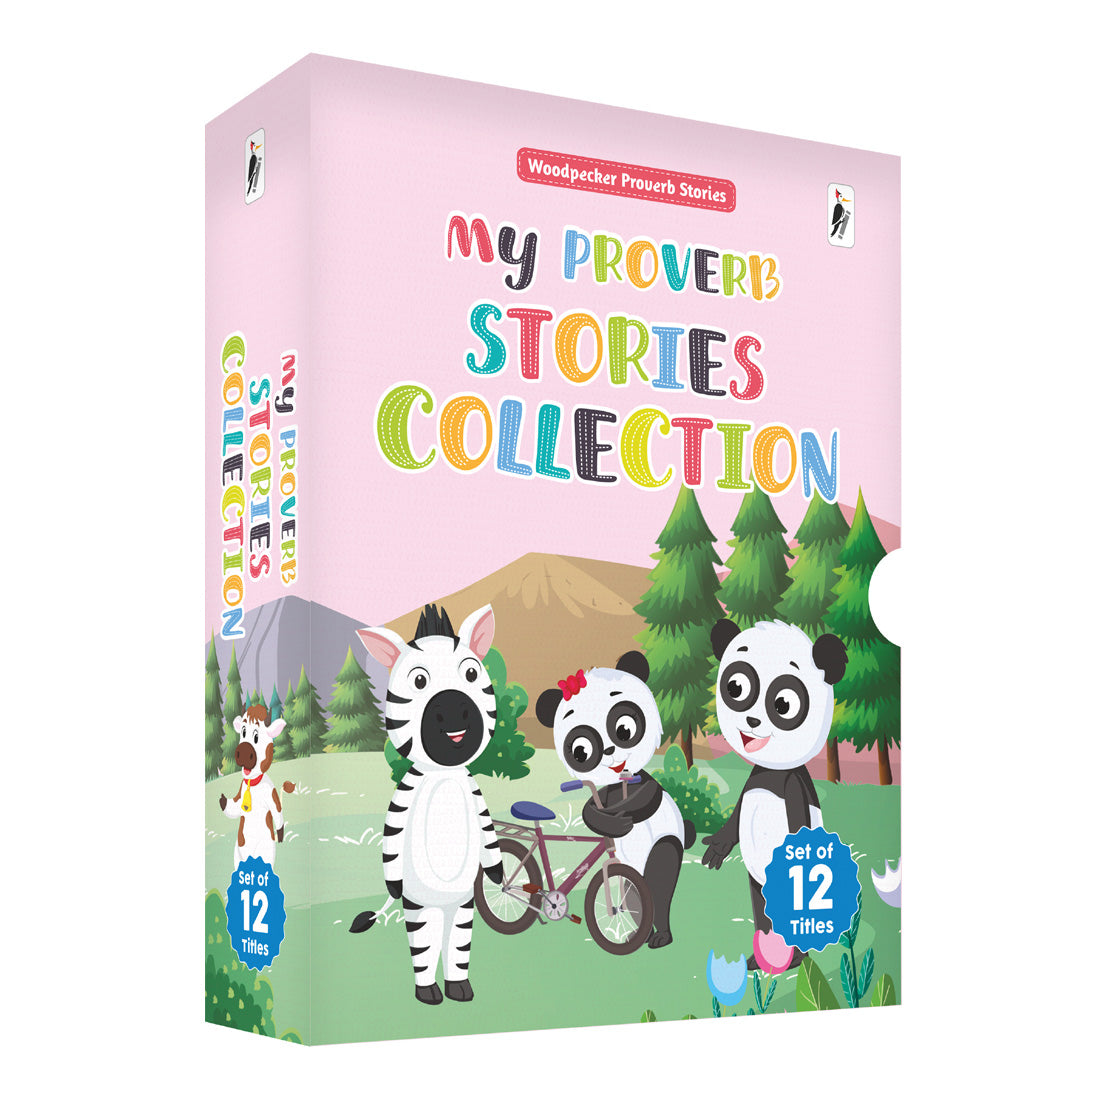 Woodpecker Books: My Proverb Stories Collection (Box of 12 Books)